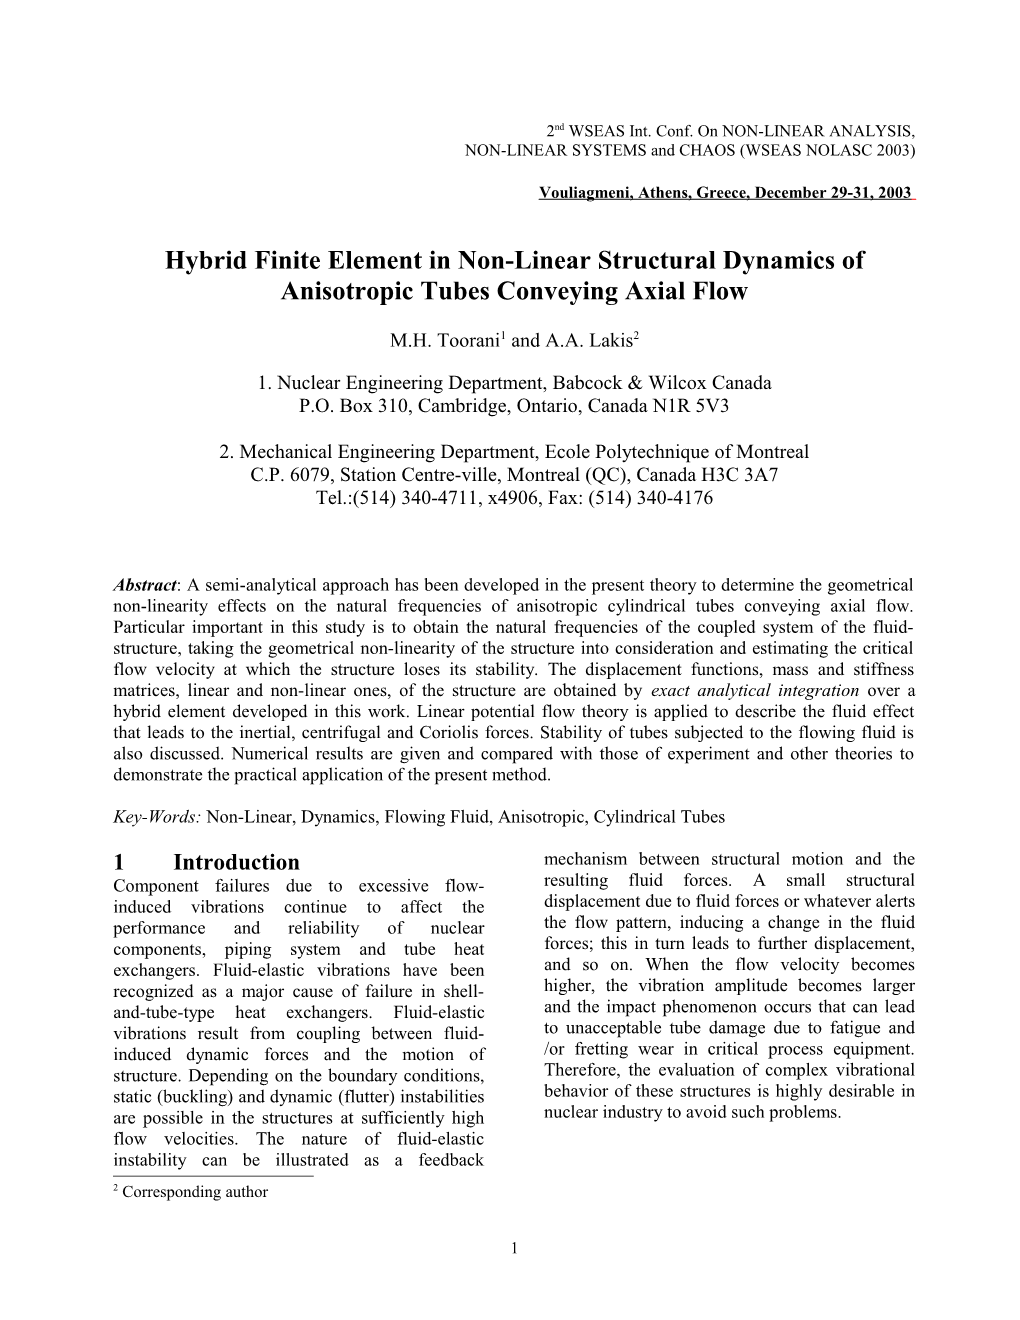 Hybrid Finite Element in Non-Linear Structural Dynamics of Anisotropic Tubes Conveying